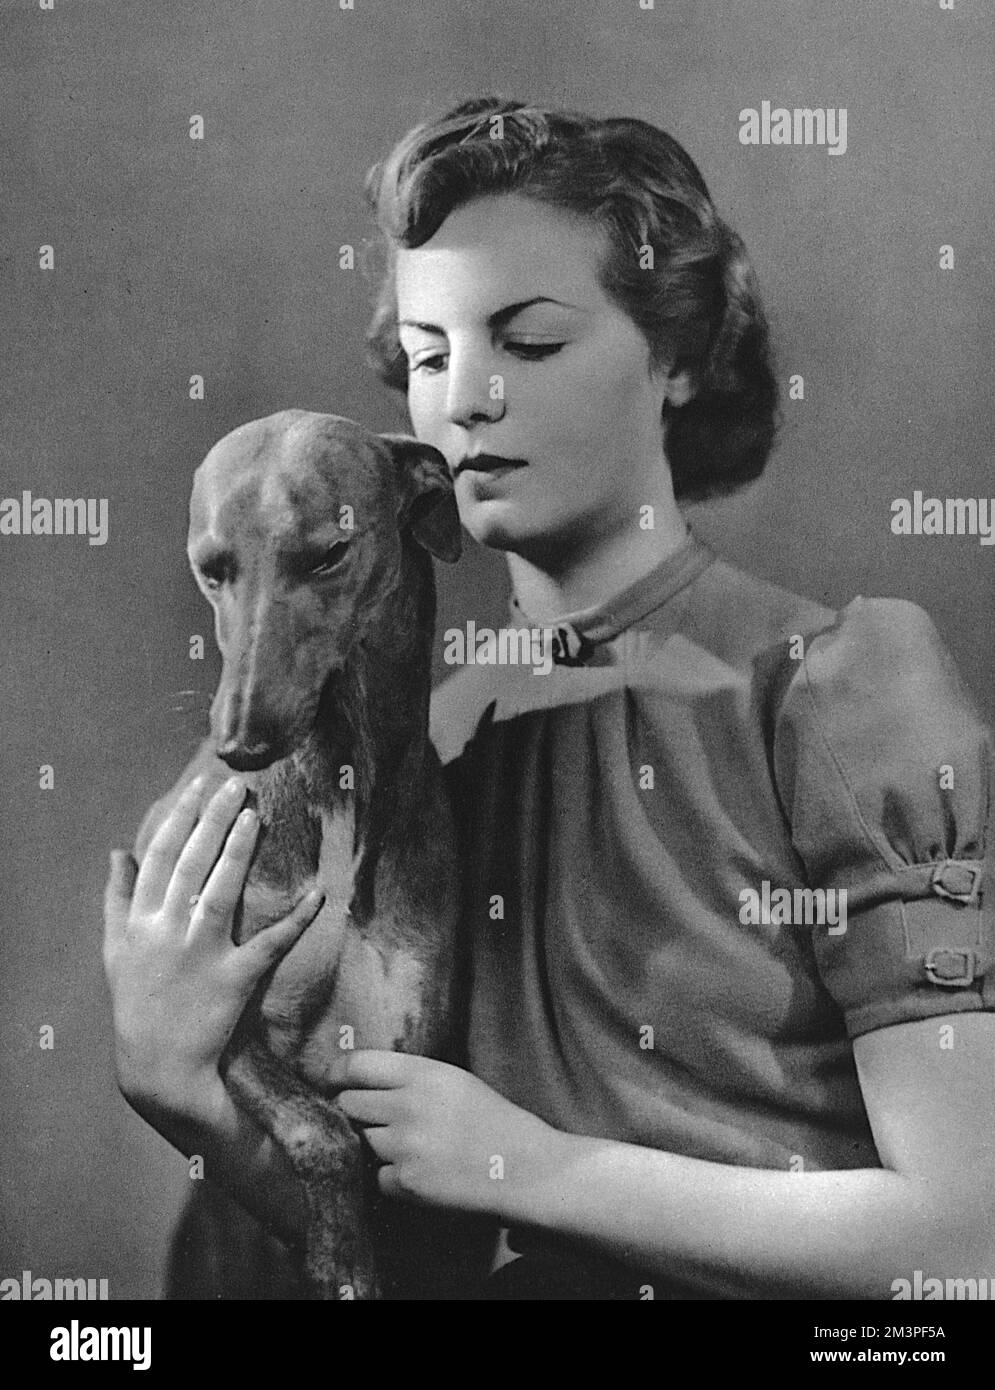 Deborah Mitford (1920-2014), later Duchess of Devonshire, pictured in 1939, a year after her coming-out, with her dog, Studley.  The youngest of the infamous six Mitford sisters, daughters of Lord and Lady Redesdale.       Date: 1939 Stock Photo